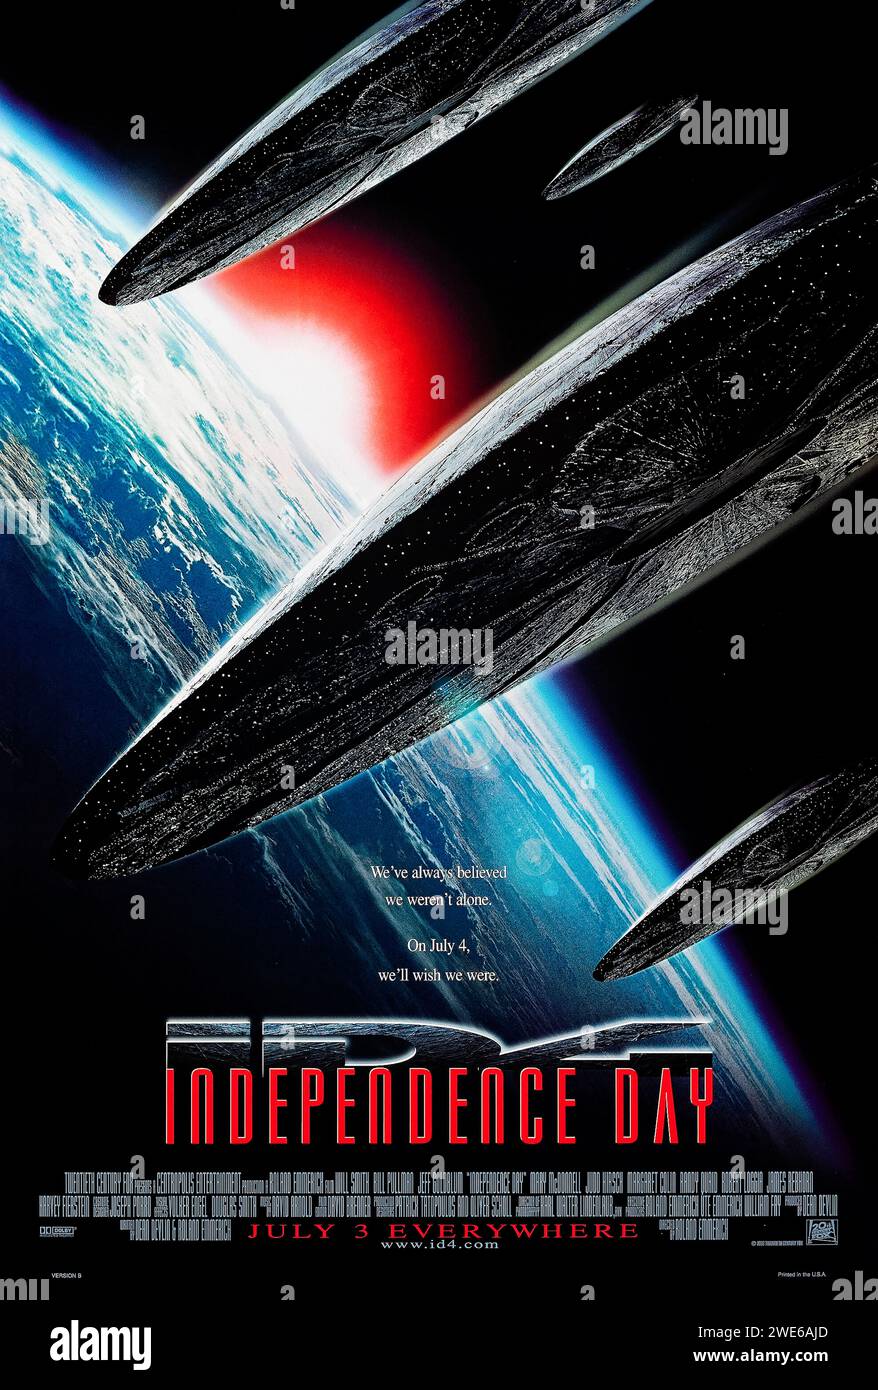 Independence Day (1996) directed by Roland Emmerich and starring Will Smith, Bill Pullman and Jeff Goldblum. The aliens are coming and their goal is to invade and destroy Earth. Fighting superior technology, mankind's best weapon is the will to survive. Photograph of an original 1996 US one sheet poster. ***EDITORIAL USE ONLY*** Credit: BFA / 20th Century Fox Stock Photo